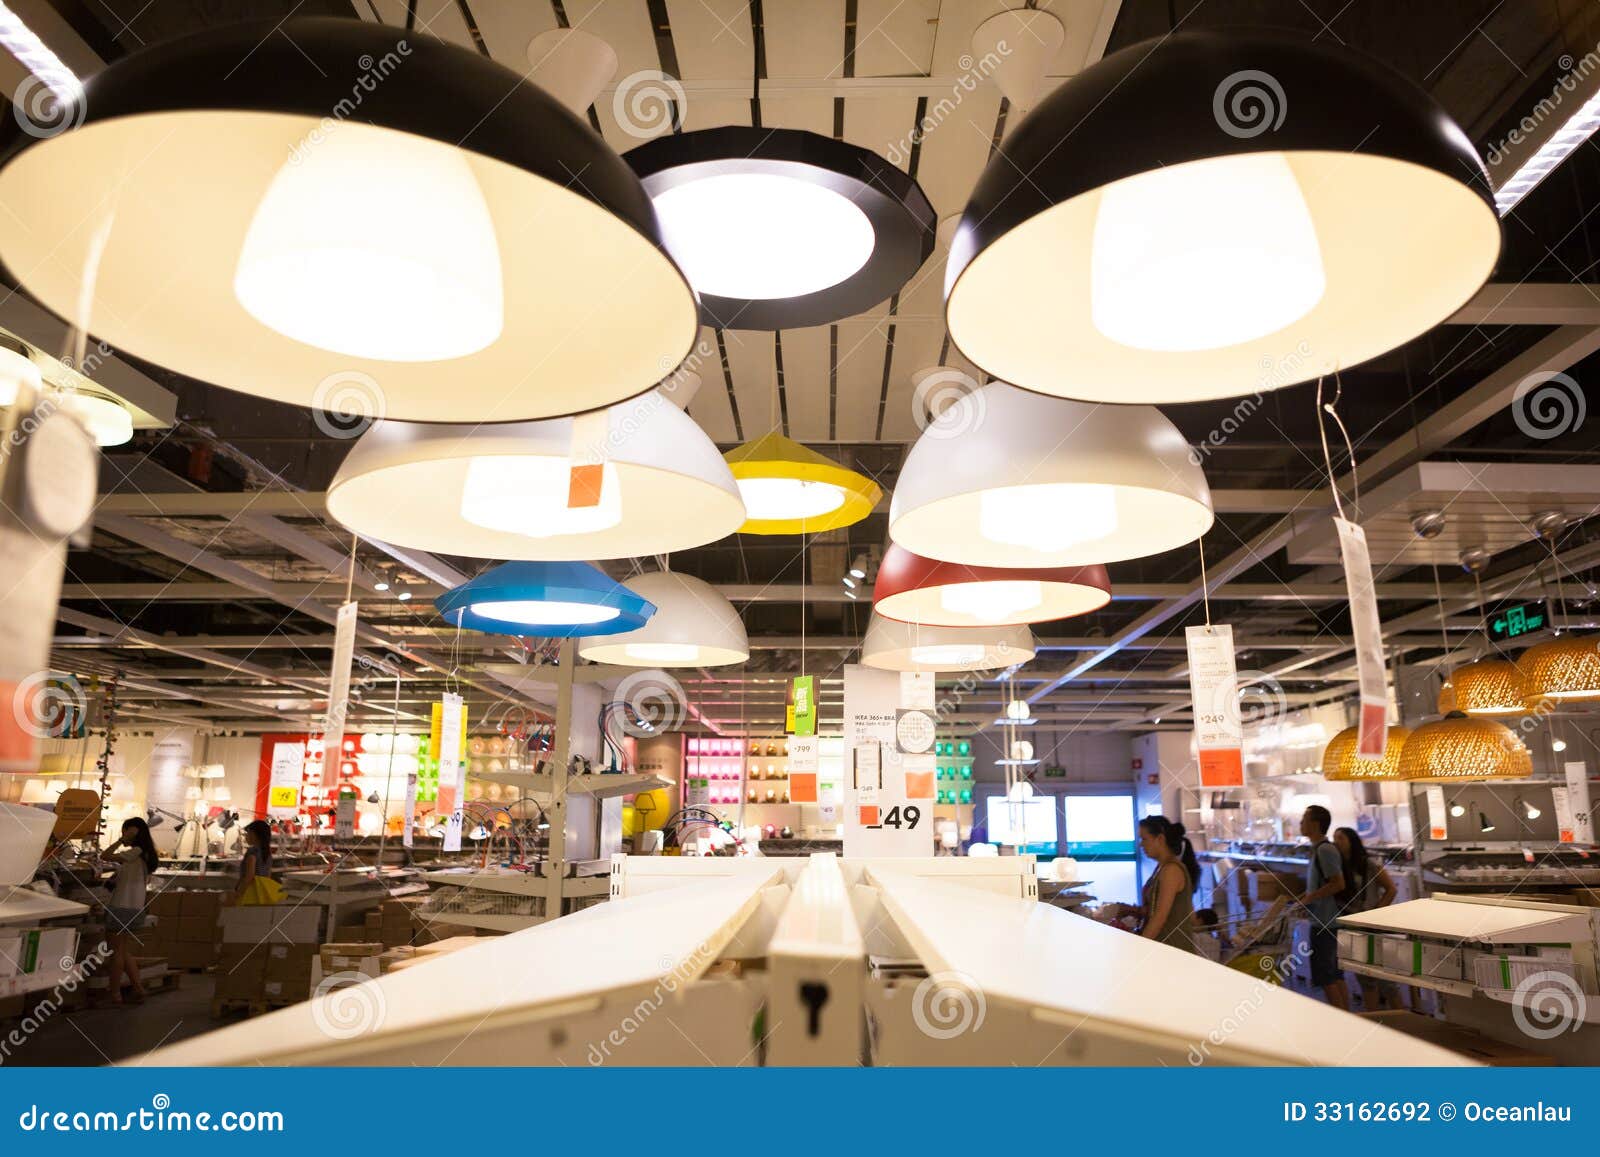 Ikea Store In Chengdu Lamps Editorial Photography Image Of Home